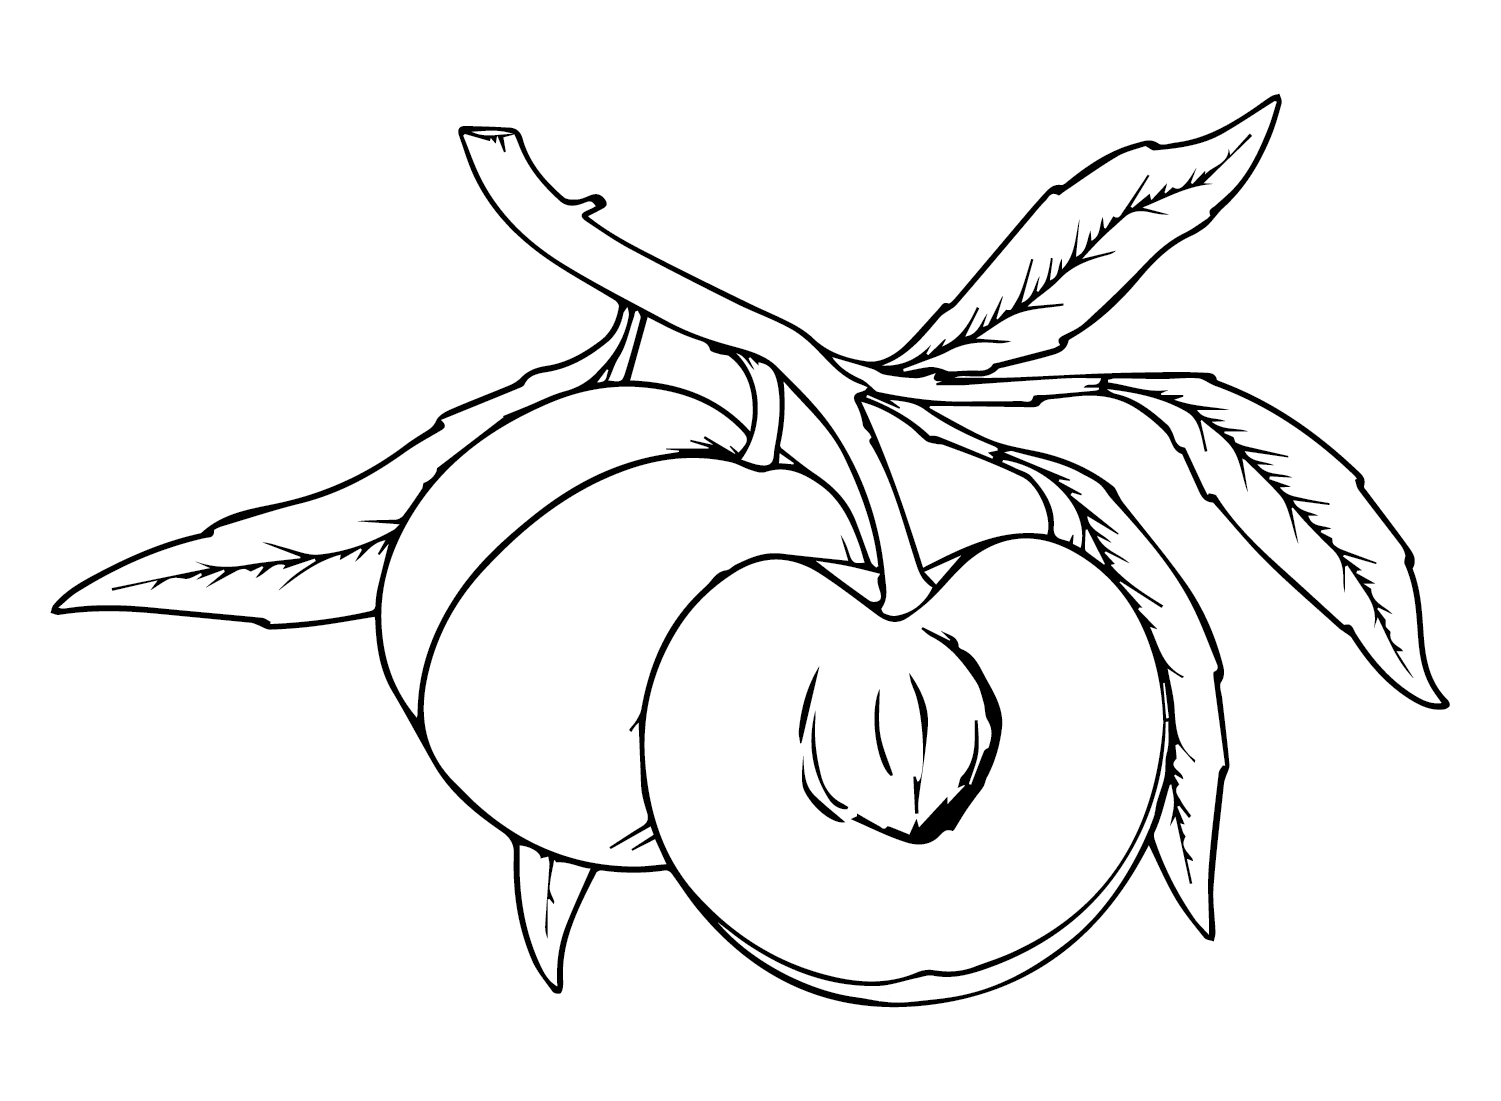 Nectarine Peach Coloring Page